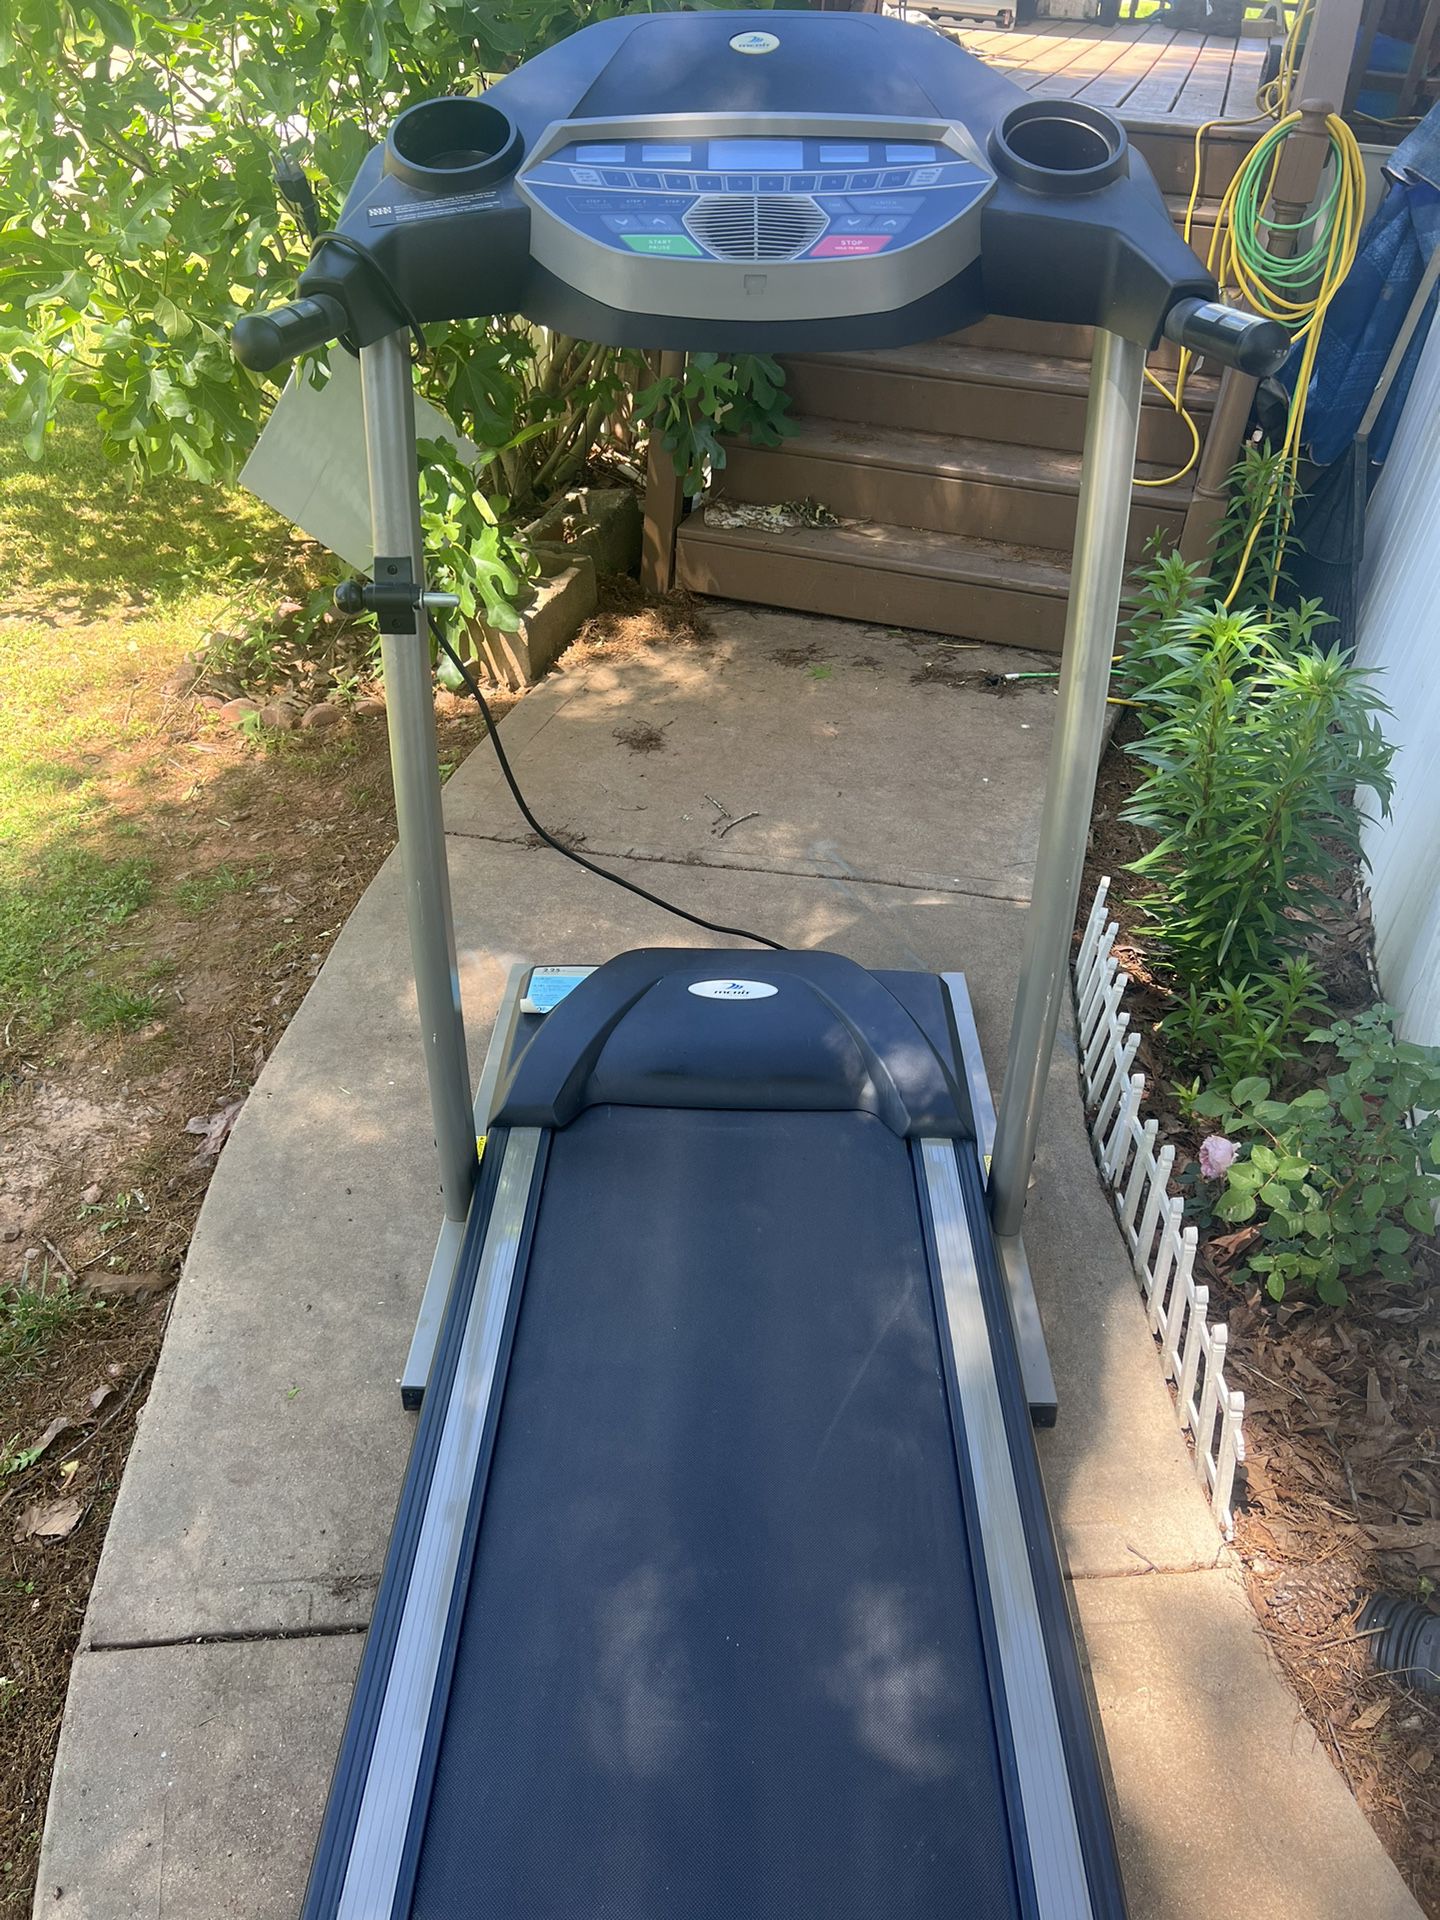 Treadmill Electric With Incline And Fan